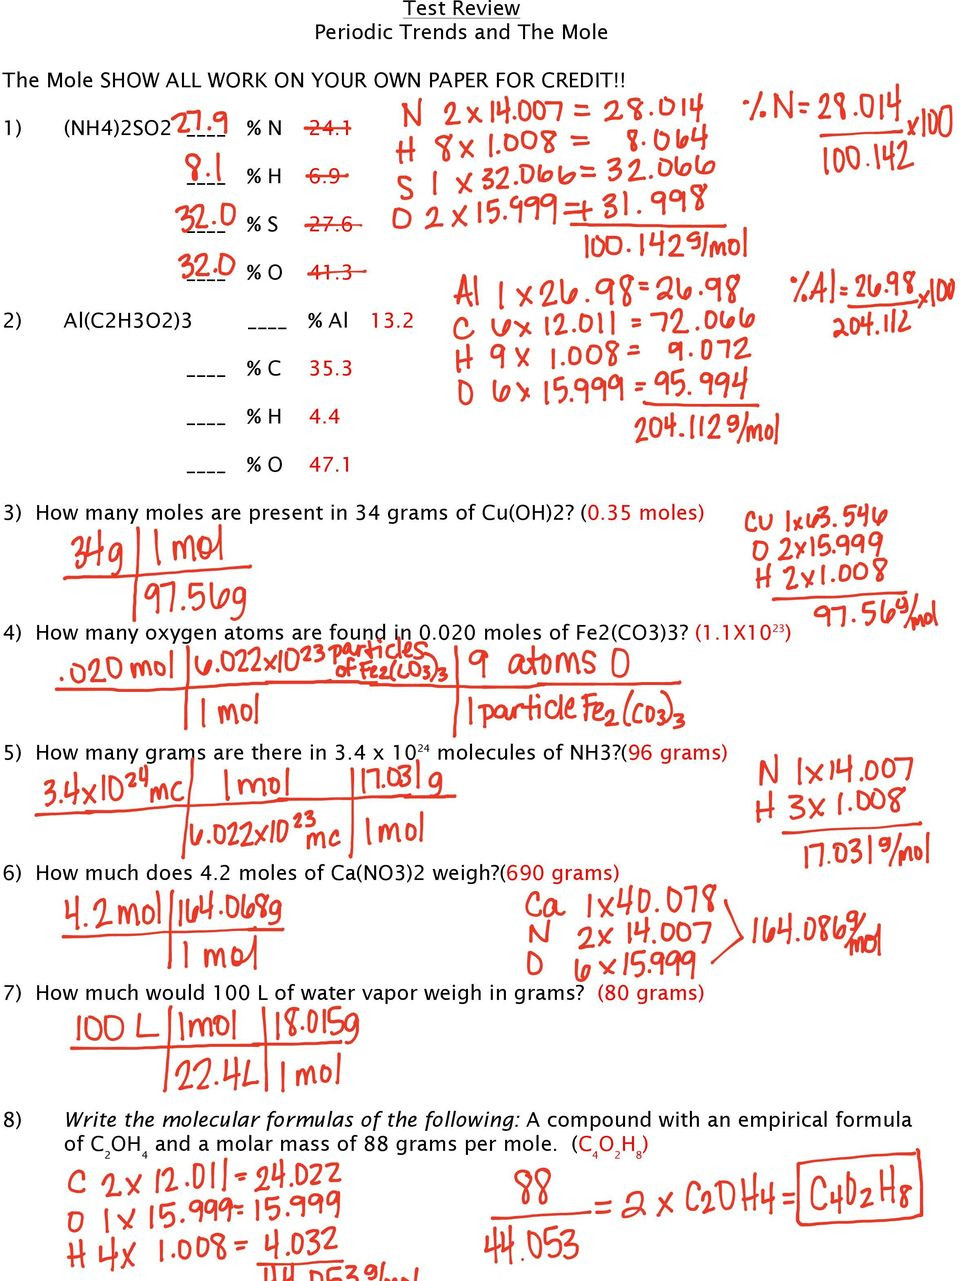 Periodic Trends Worksheet Answer Key Test Review Periodic Trends and the Mole Pdf Free Download